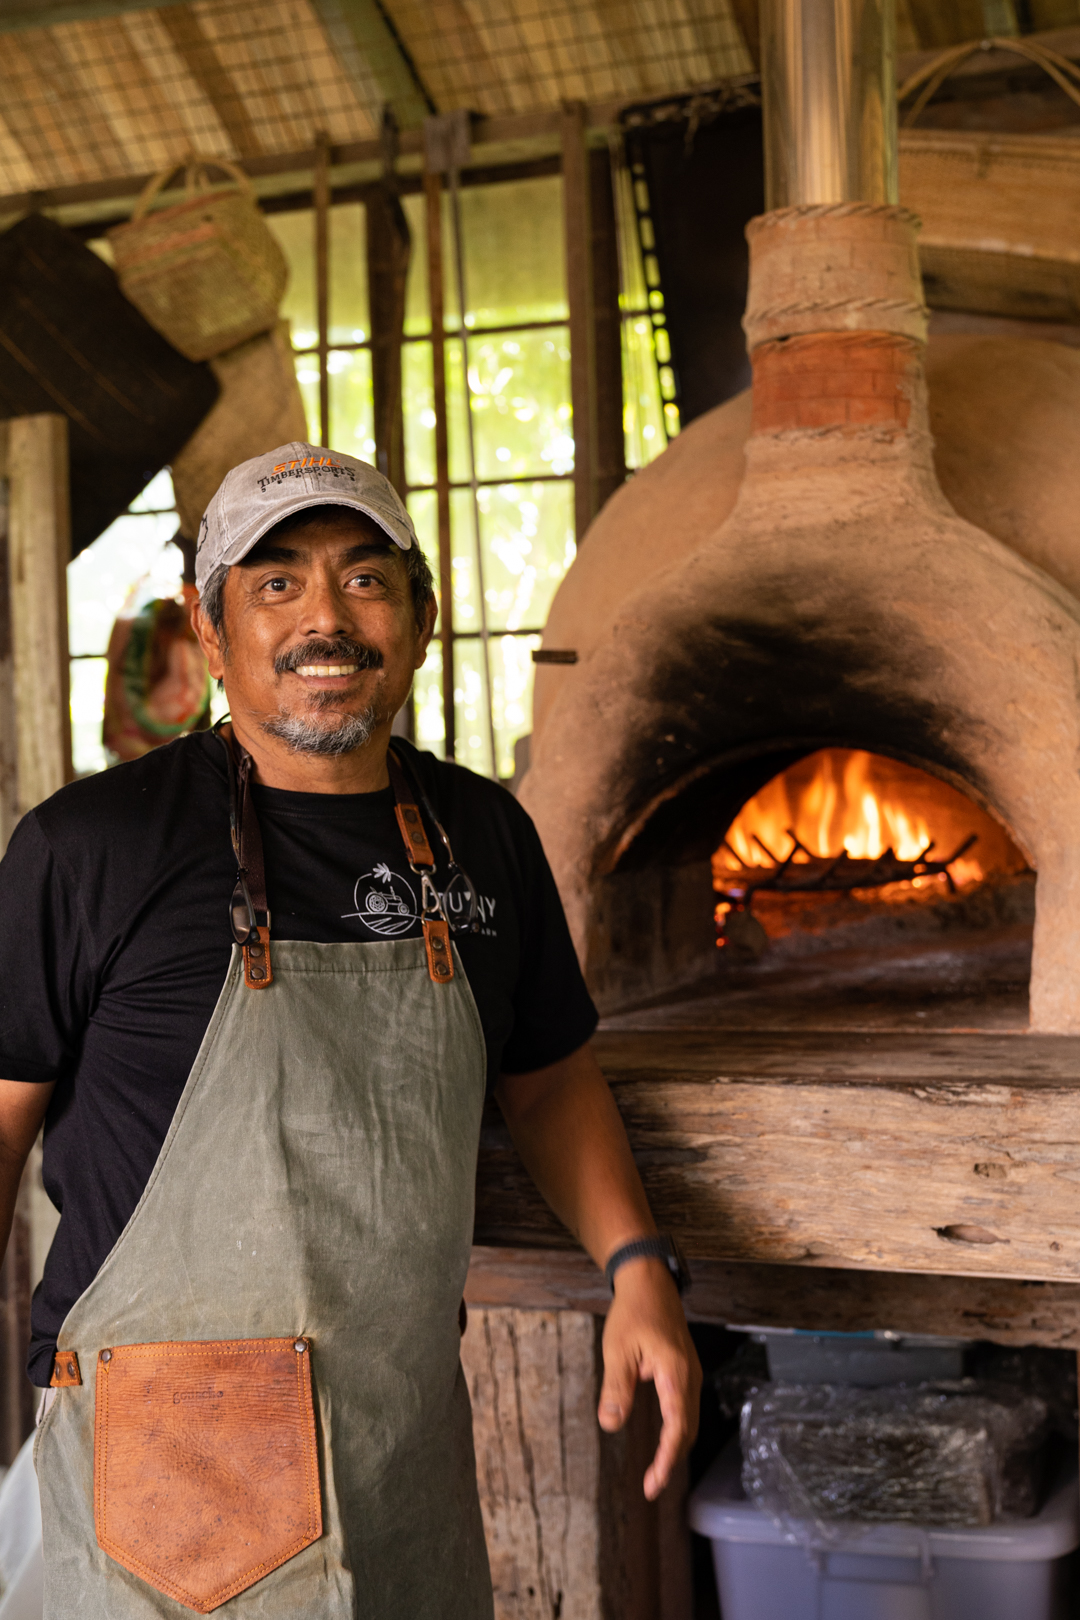 Anthony with his clay wood-fired kiln he himself built